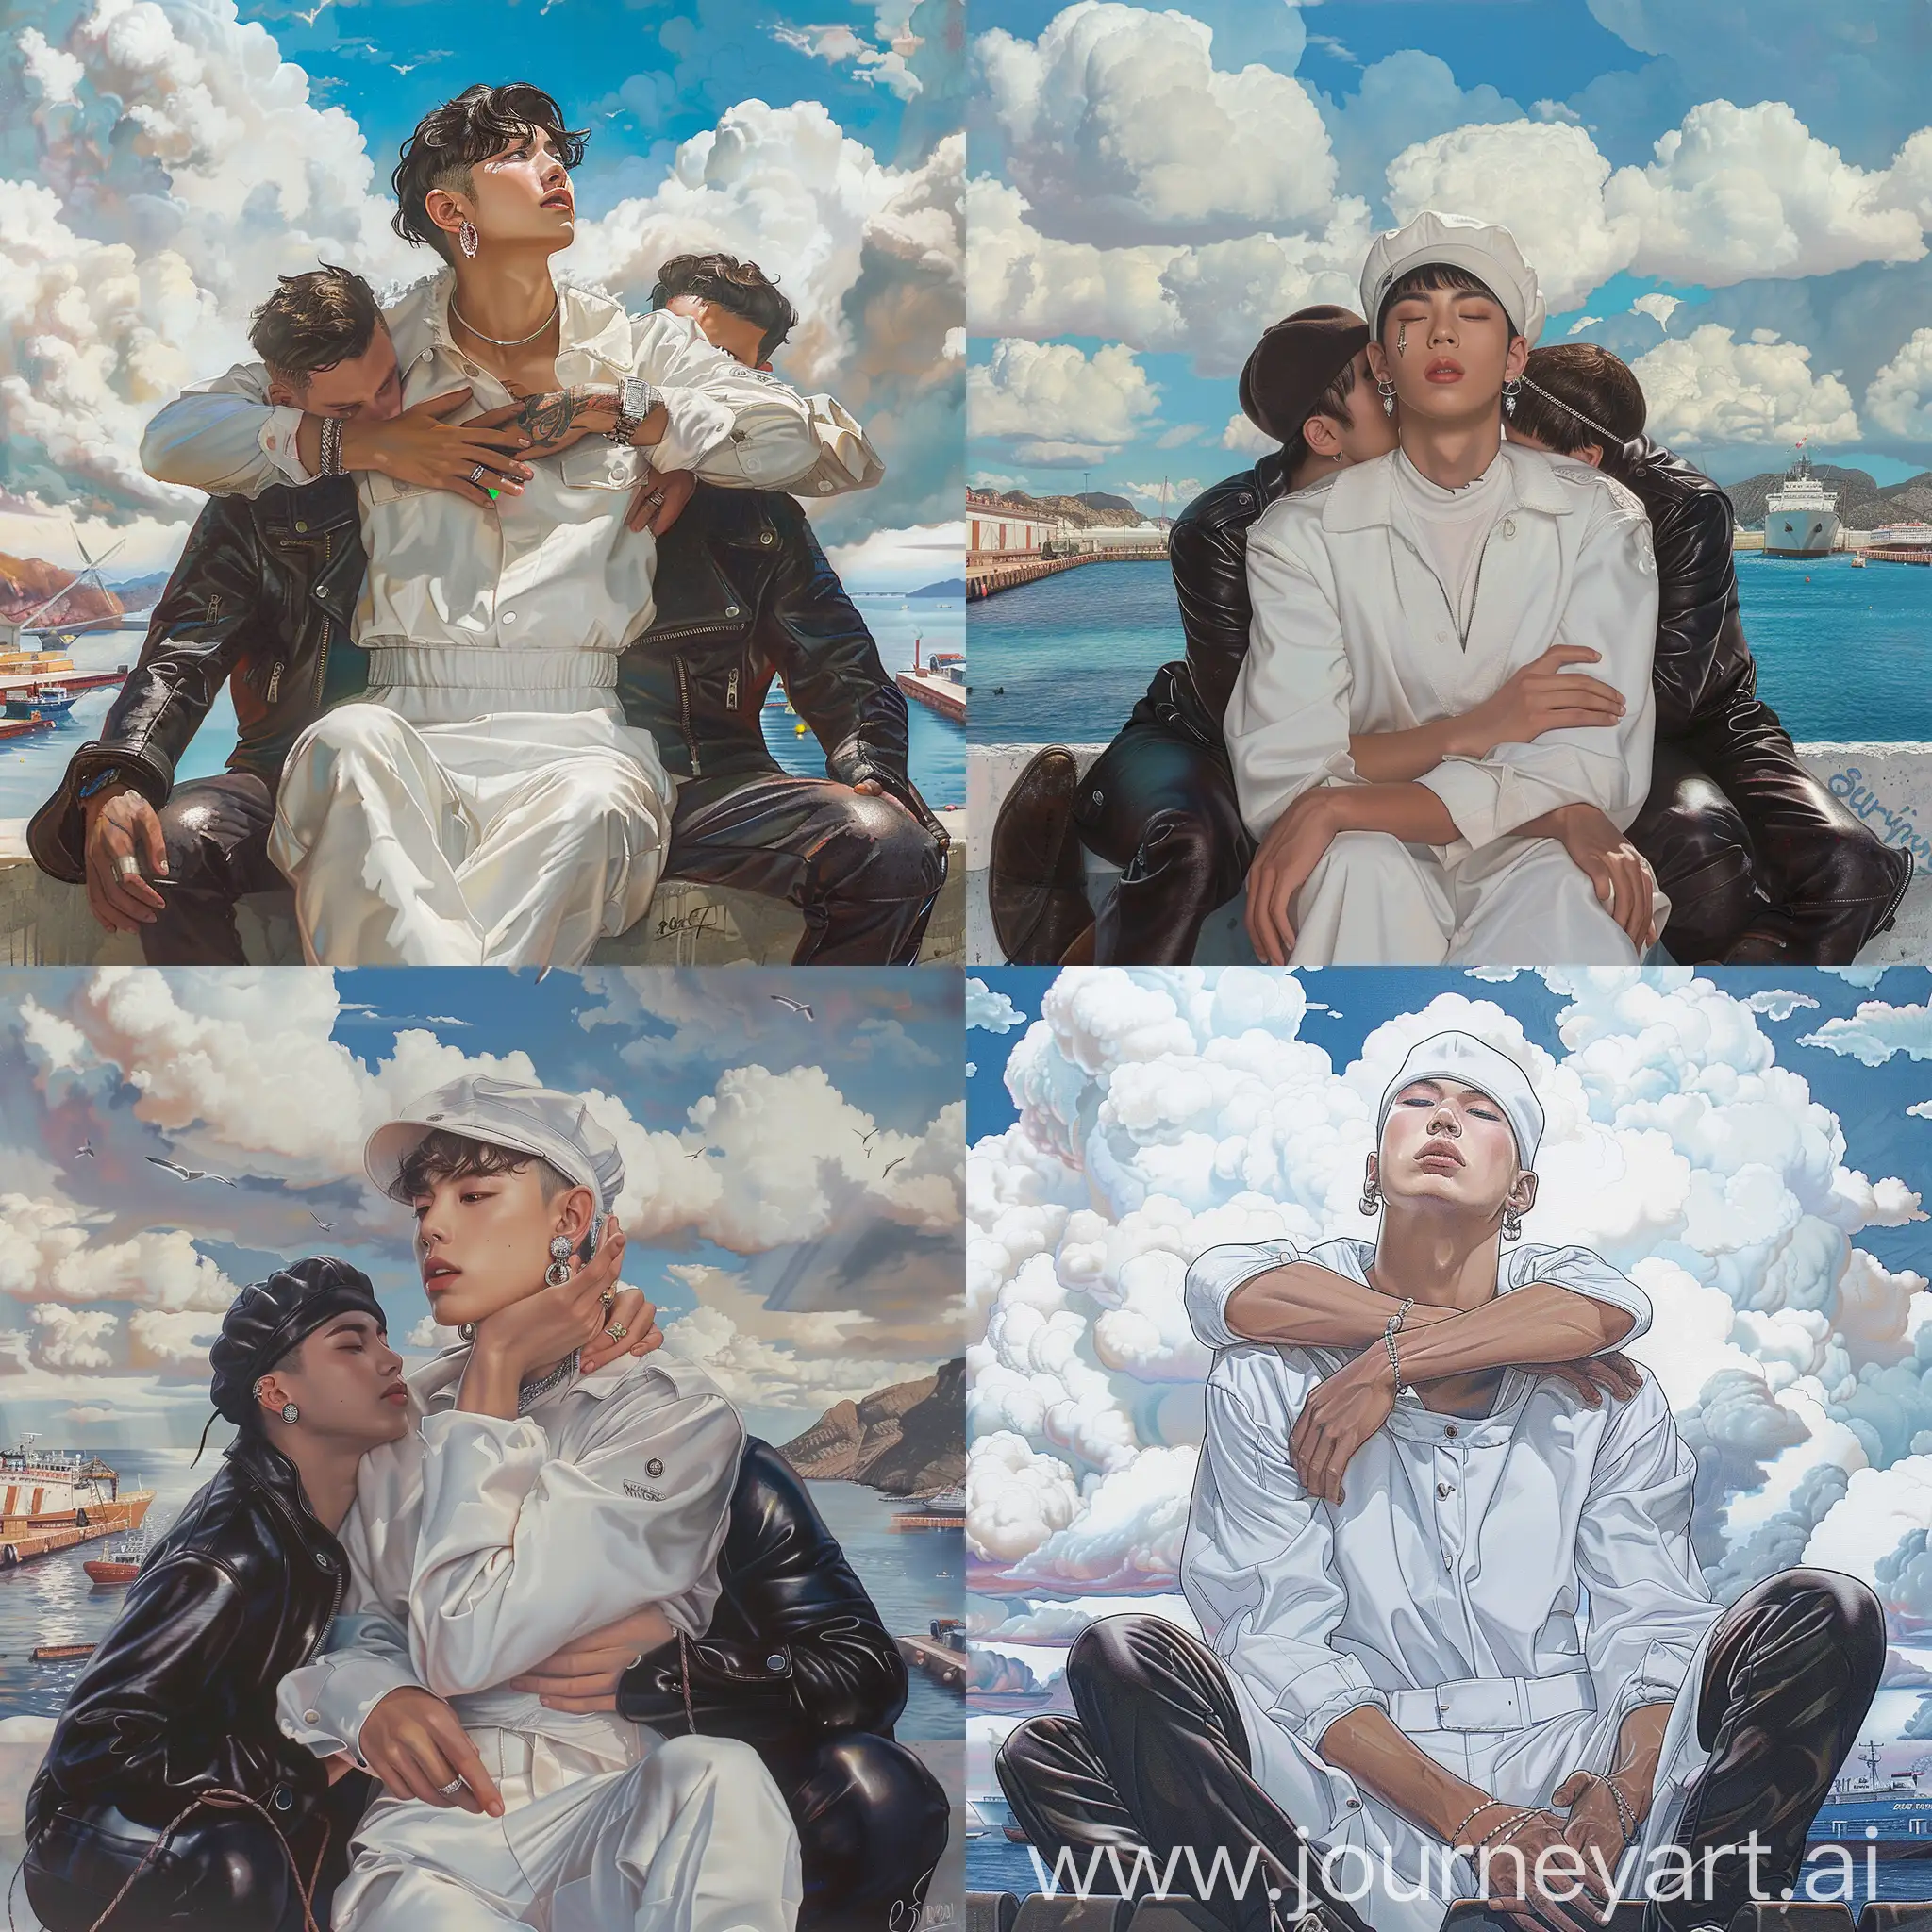 colourful picture of young male sailor in white outfit, silver earrings, sitting on a harbol wall, hugged by two leatherboys, surrounded by white clouds